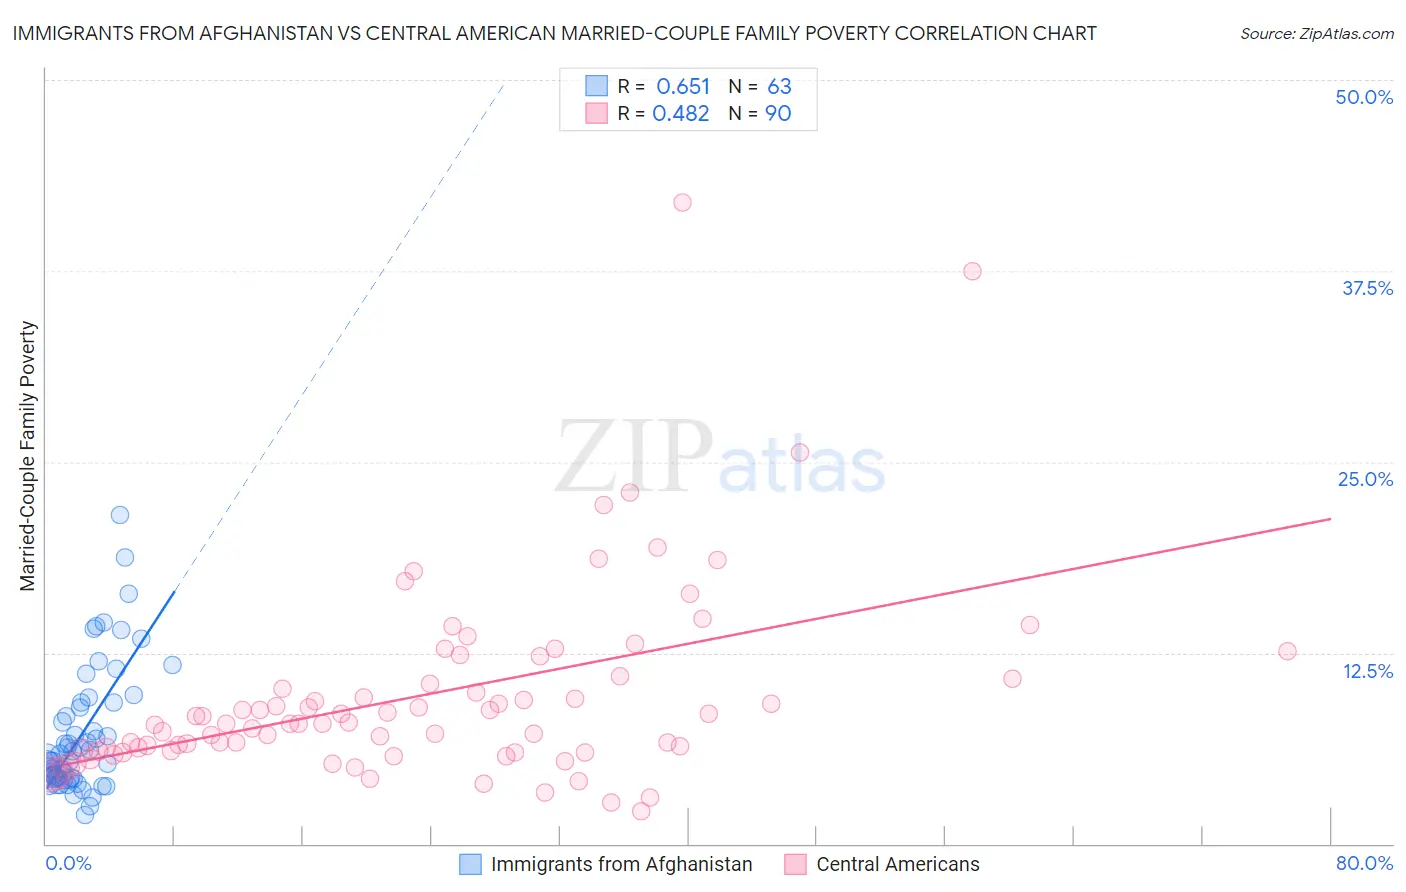 Immigrants from Afghanistan vs Central American Married-Couple Family Poverty